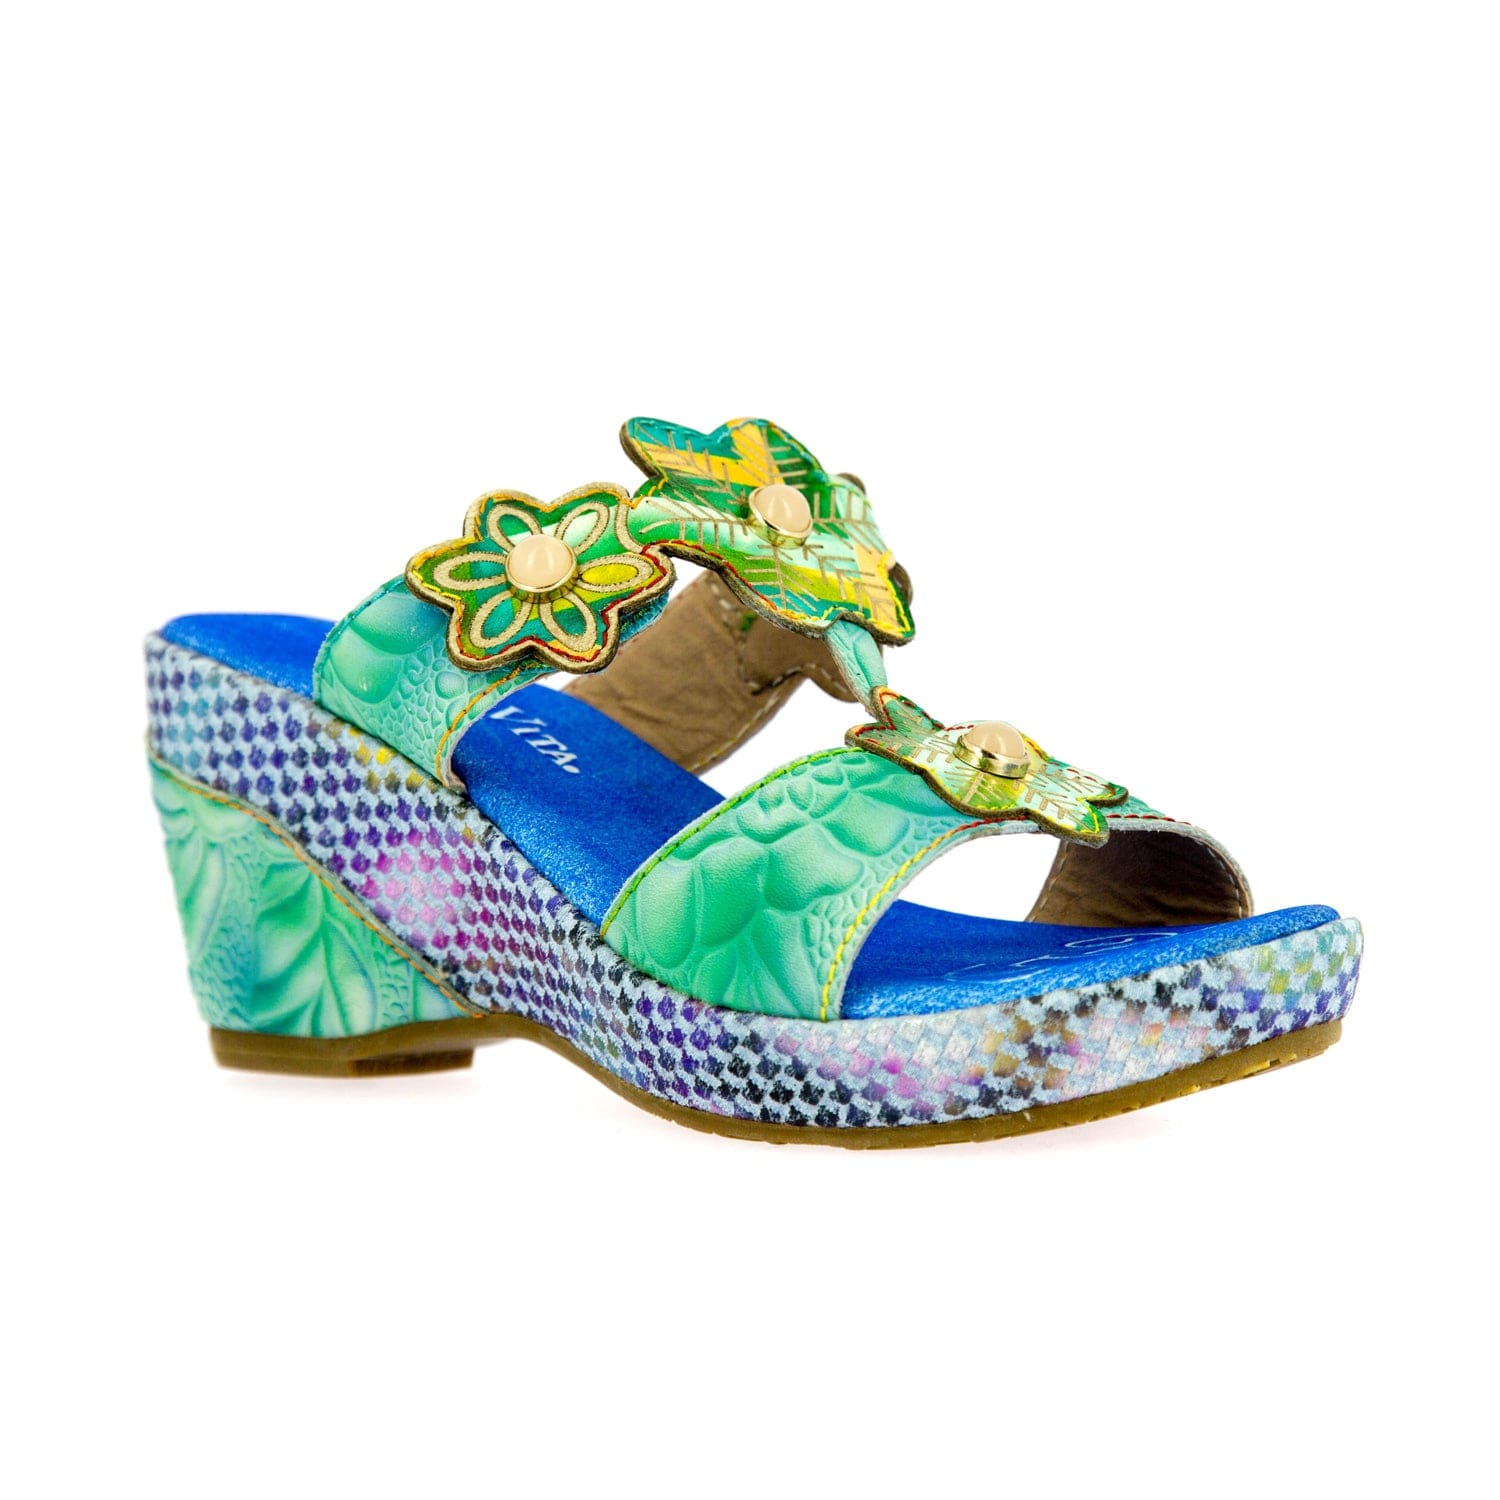 Chaussures BEAUTE 04 - 37 / Turquoise - Sandale